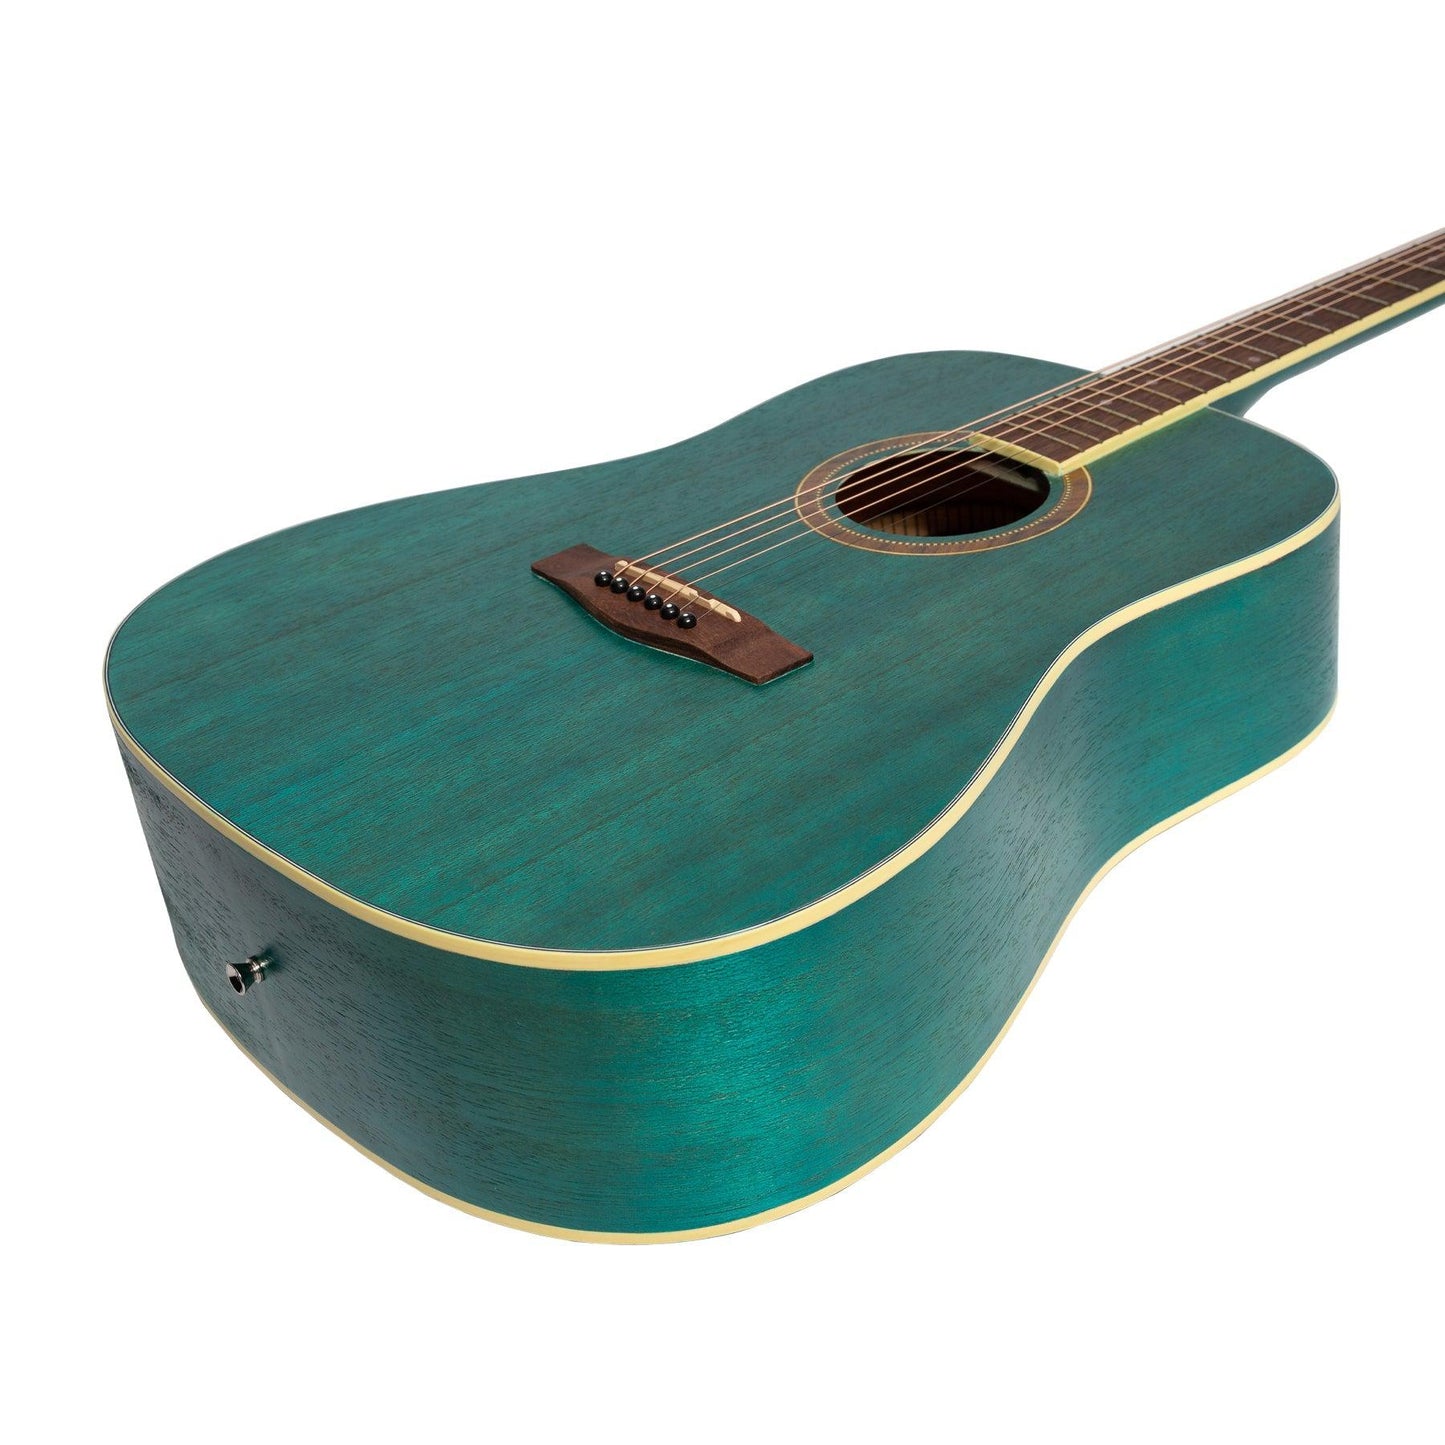 Martinez '41 Series' Dreadnought Acoustic Guitar Pack (Teal Green)